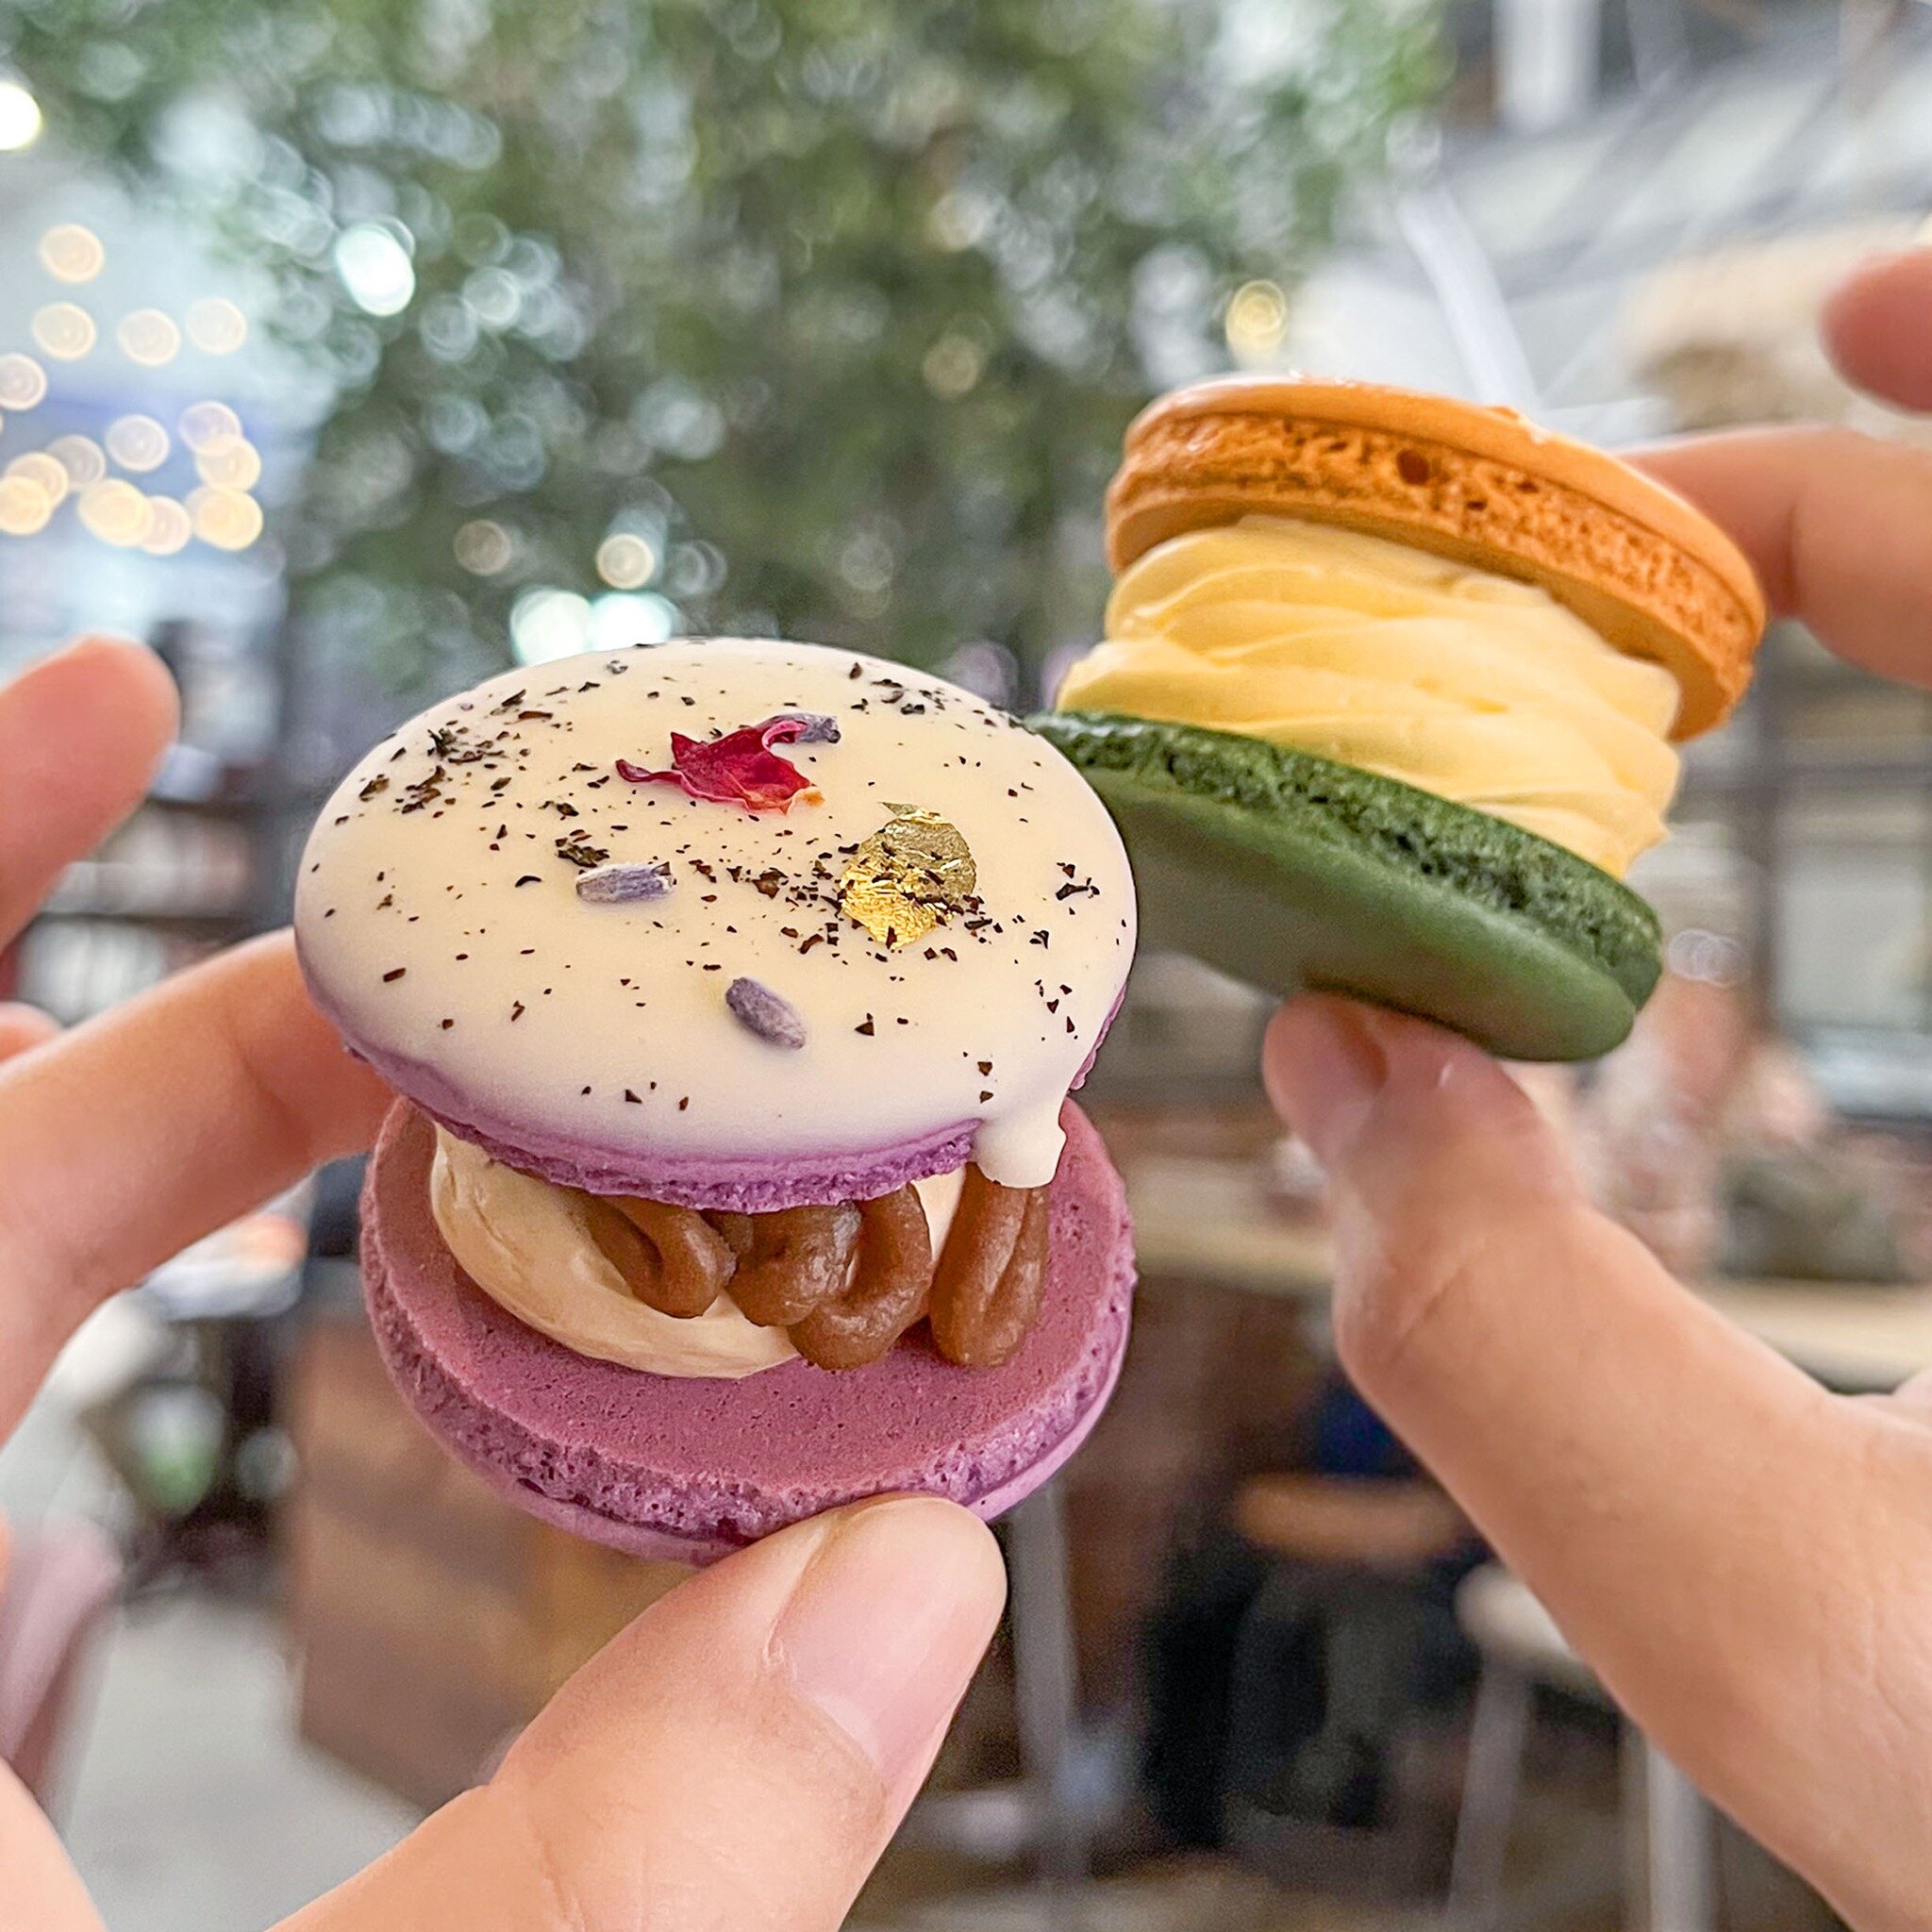 🙌😛 Macaron cheers because it's the weekend! 👨&zwj;🍳❤️ Did you know each of our macarons is made fresh and handcrafted? This is your sign you deserve sweets today!

For cake reservations, please visit https://gabicake.com or fill out a cake form a